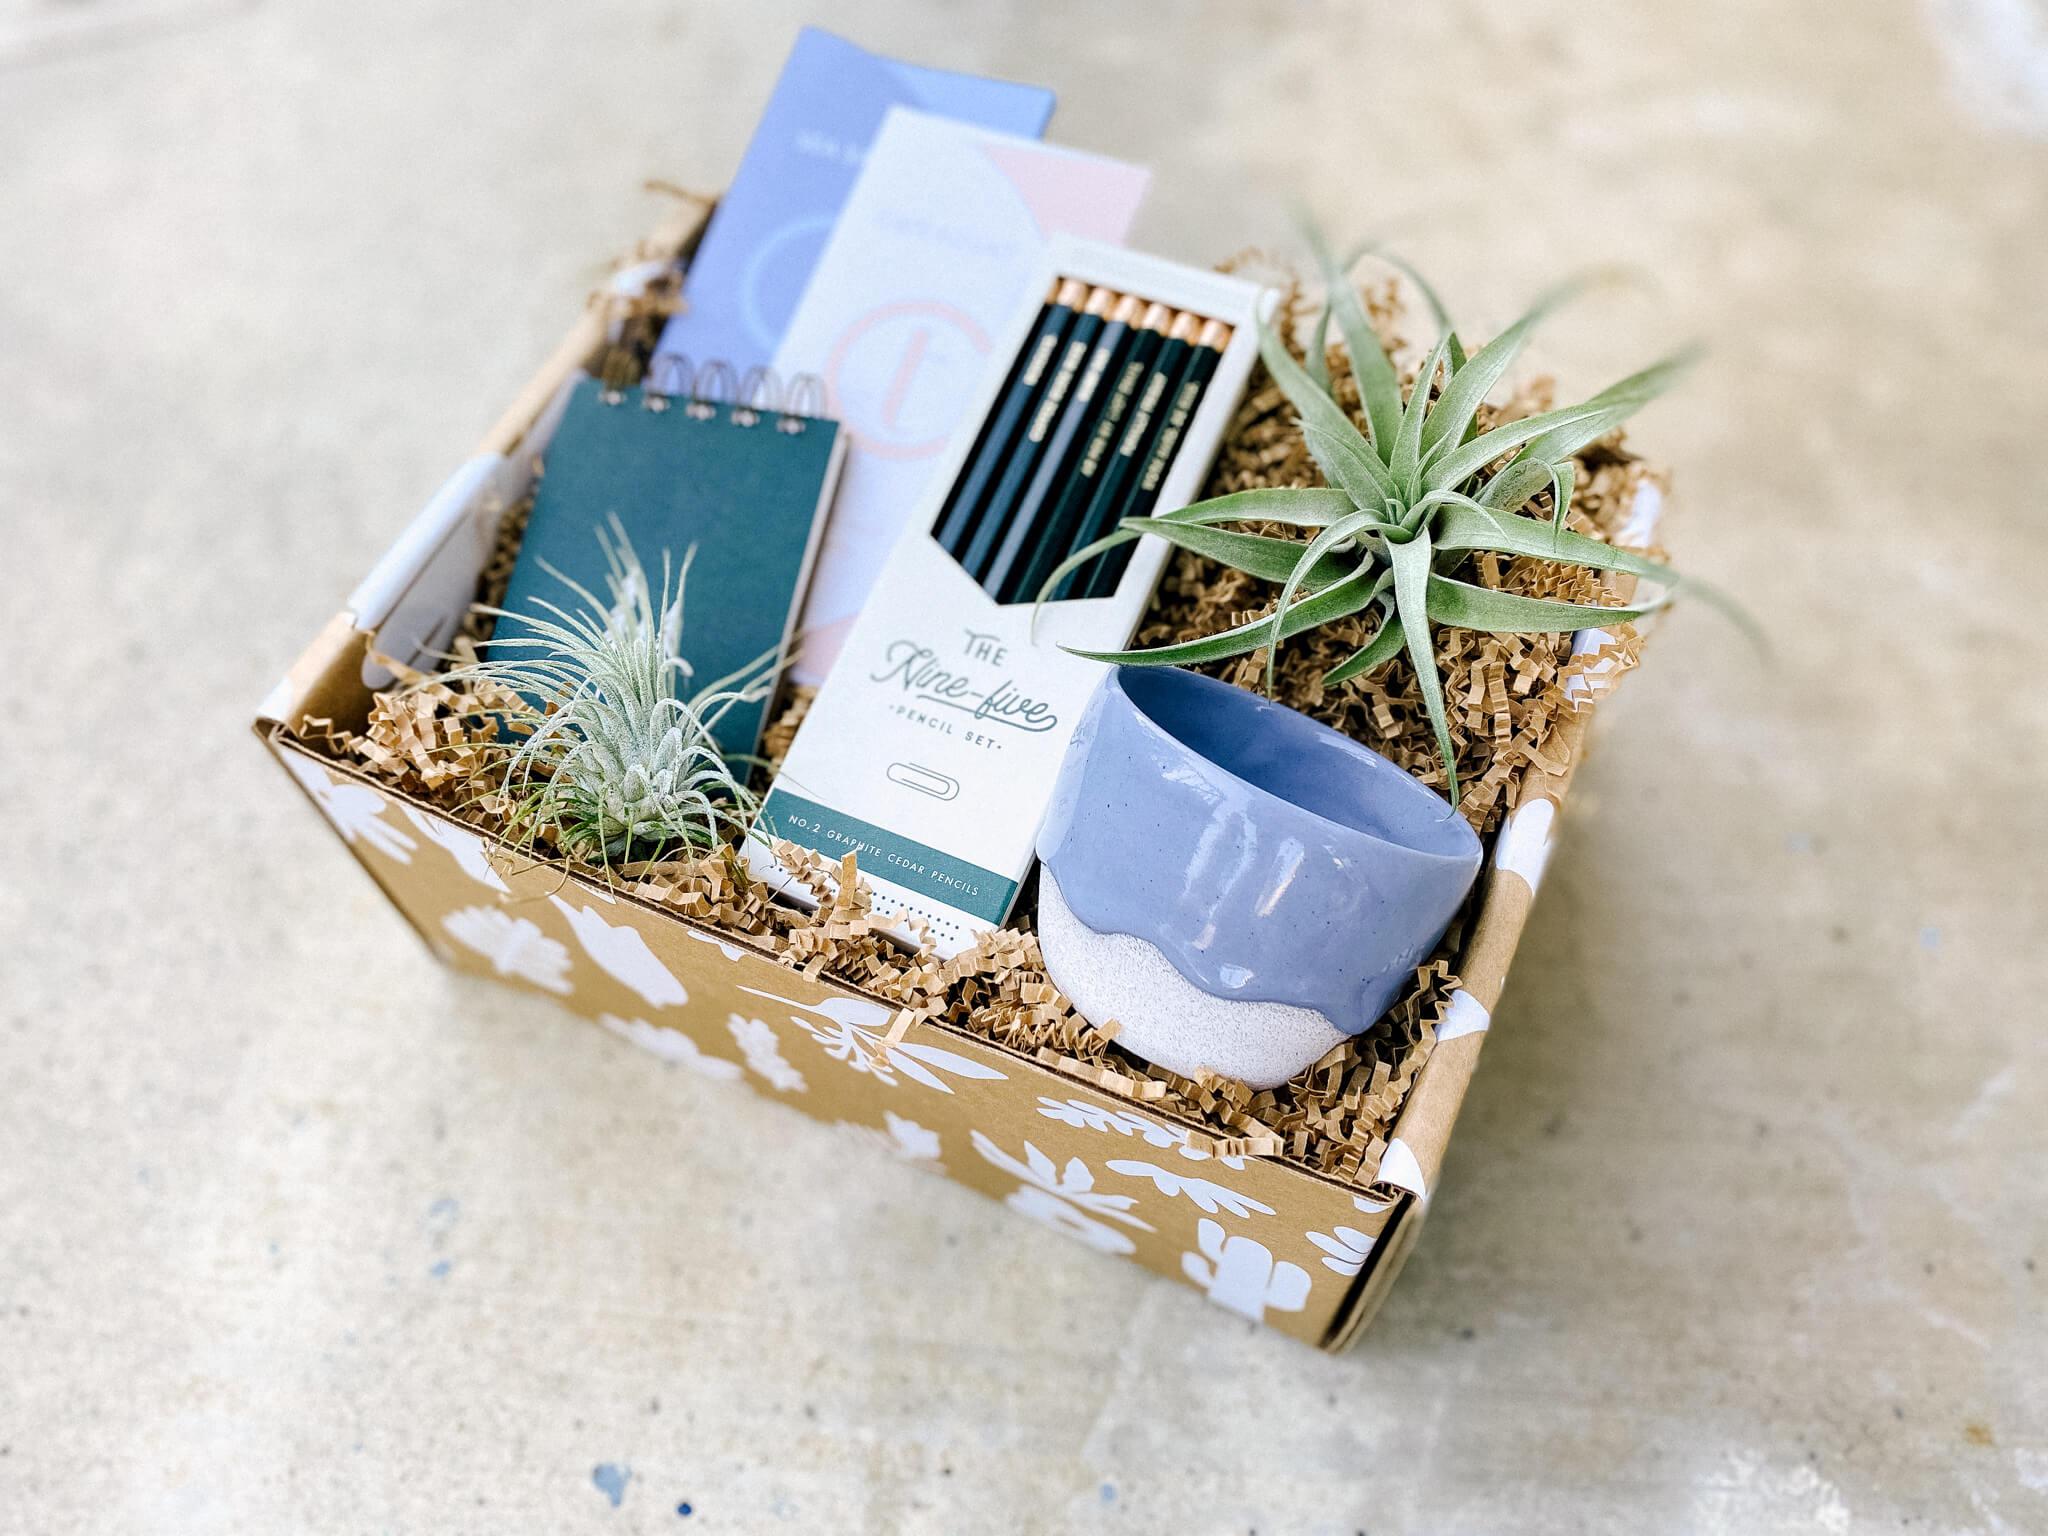 Gift box with air plant, handmade planter and botanical gifts in whimsical gift box mailer